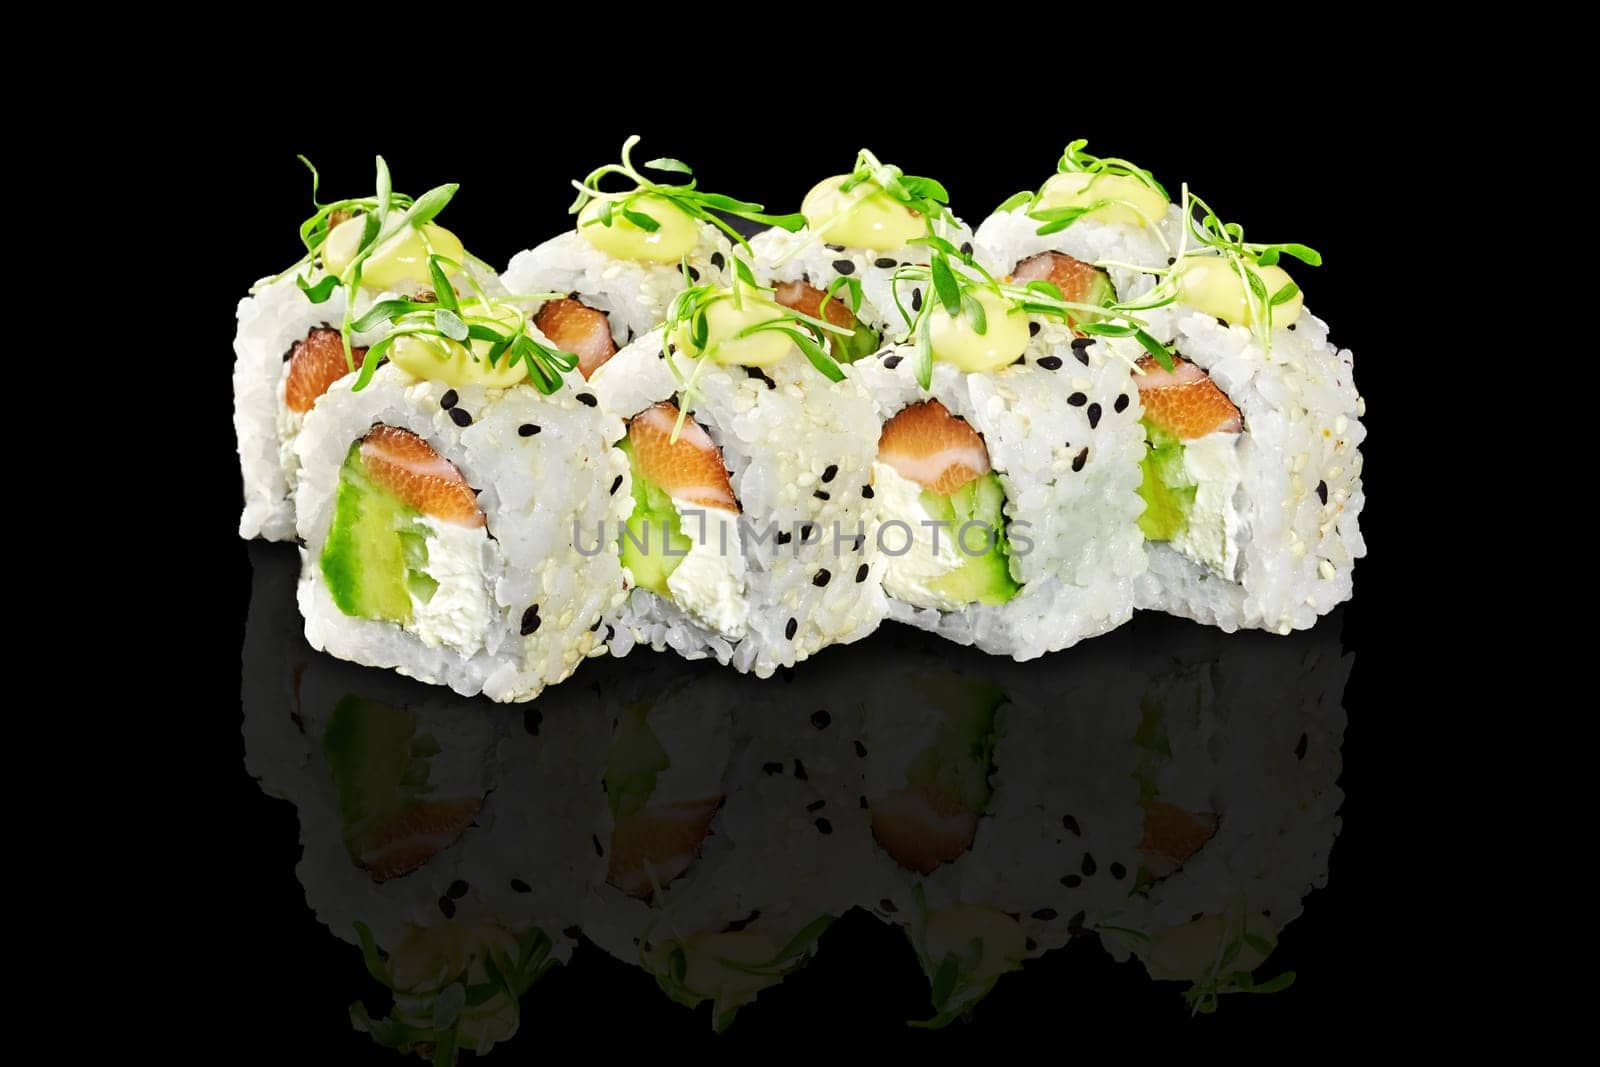 Sesame coated sushi rolls with cream cheese, avocado and fresh salmon, garnished with microgreens and drizzle of mayo, presented on reflective black surface. Japanese cuisine